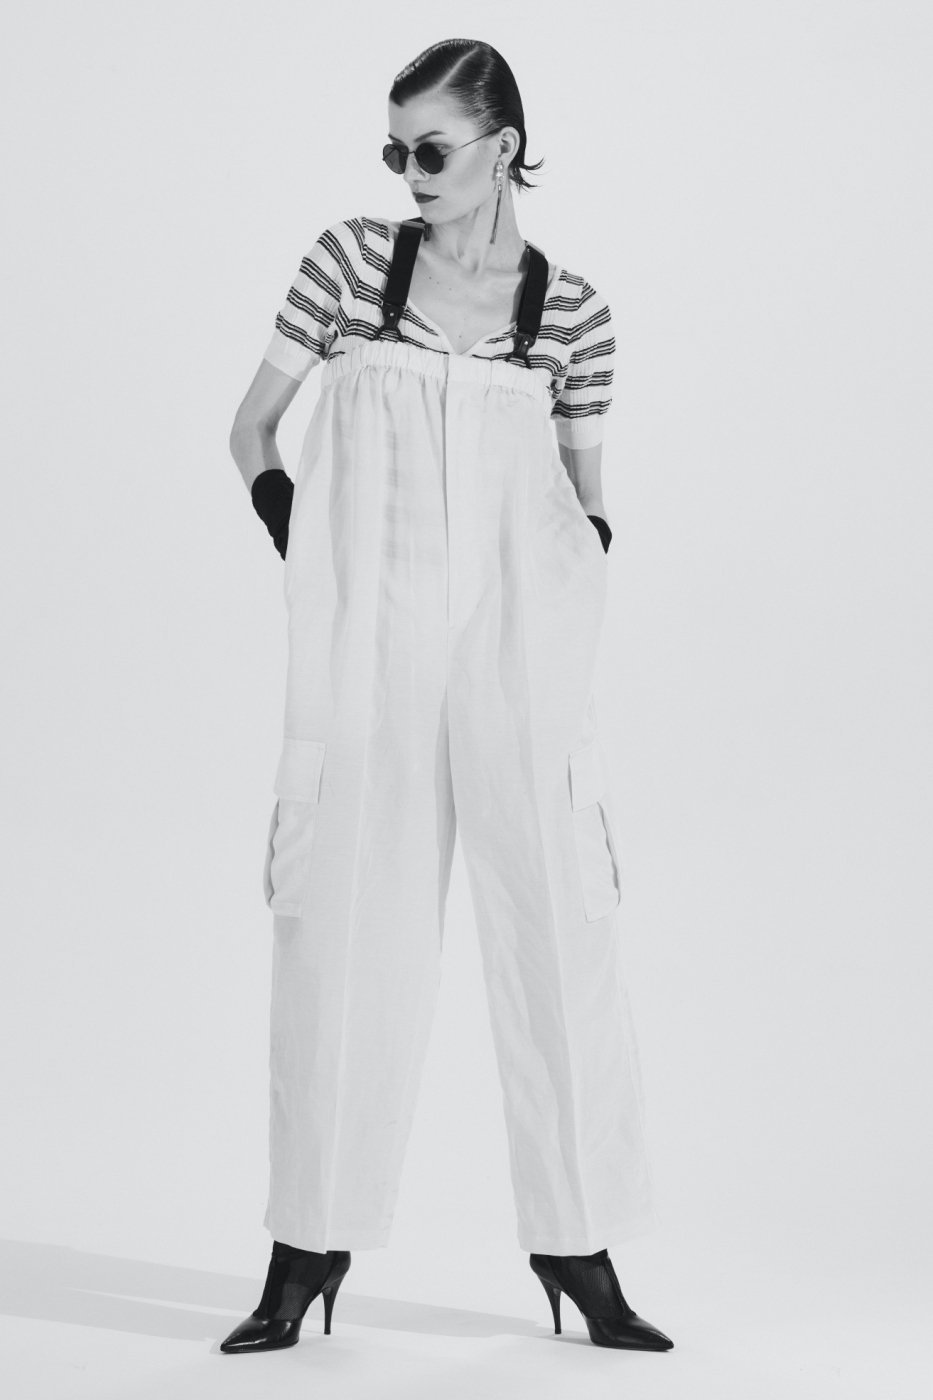 <img class='new_mark_img1' src='https://img.shop-pro.jp/img/new/icons8.gif' style='border:none;display:inline;margin:0px;padding:0px;width:auto;' />CURRENTAGE-CHINO OVERALLS-WHITE